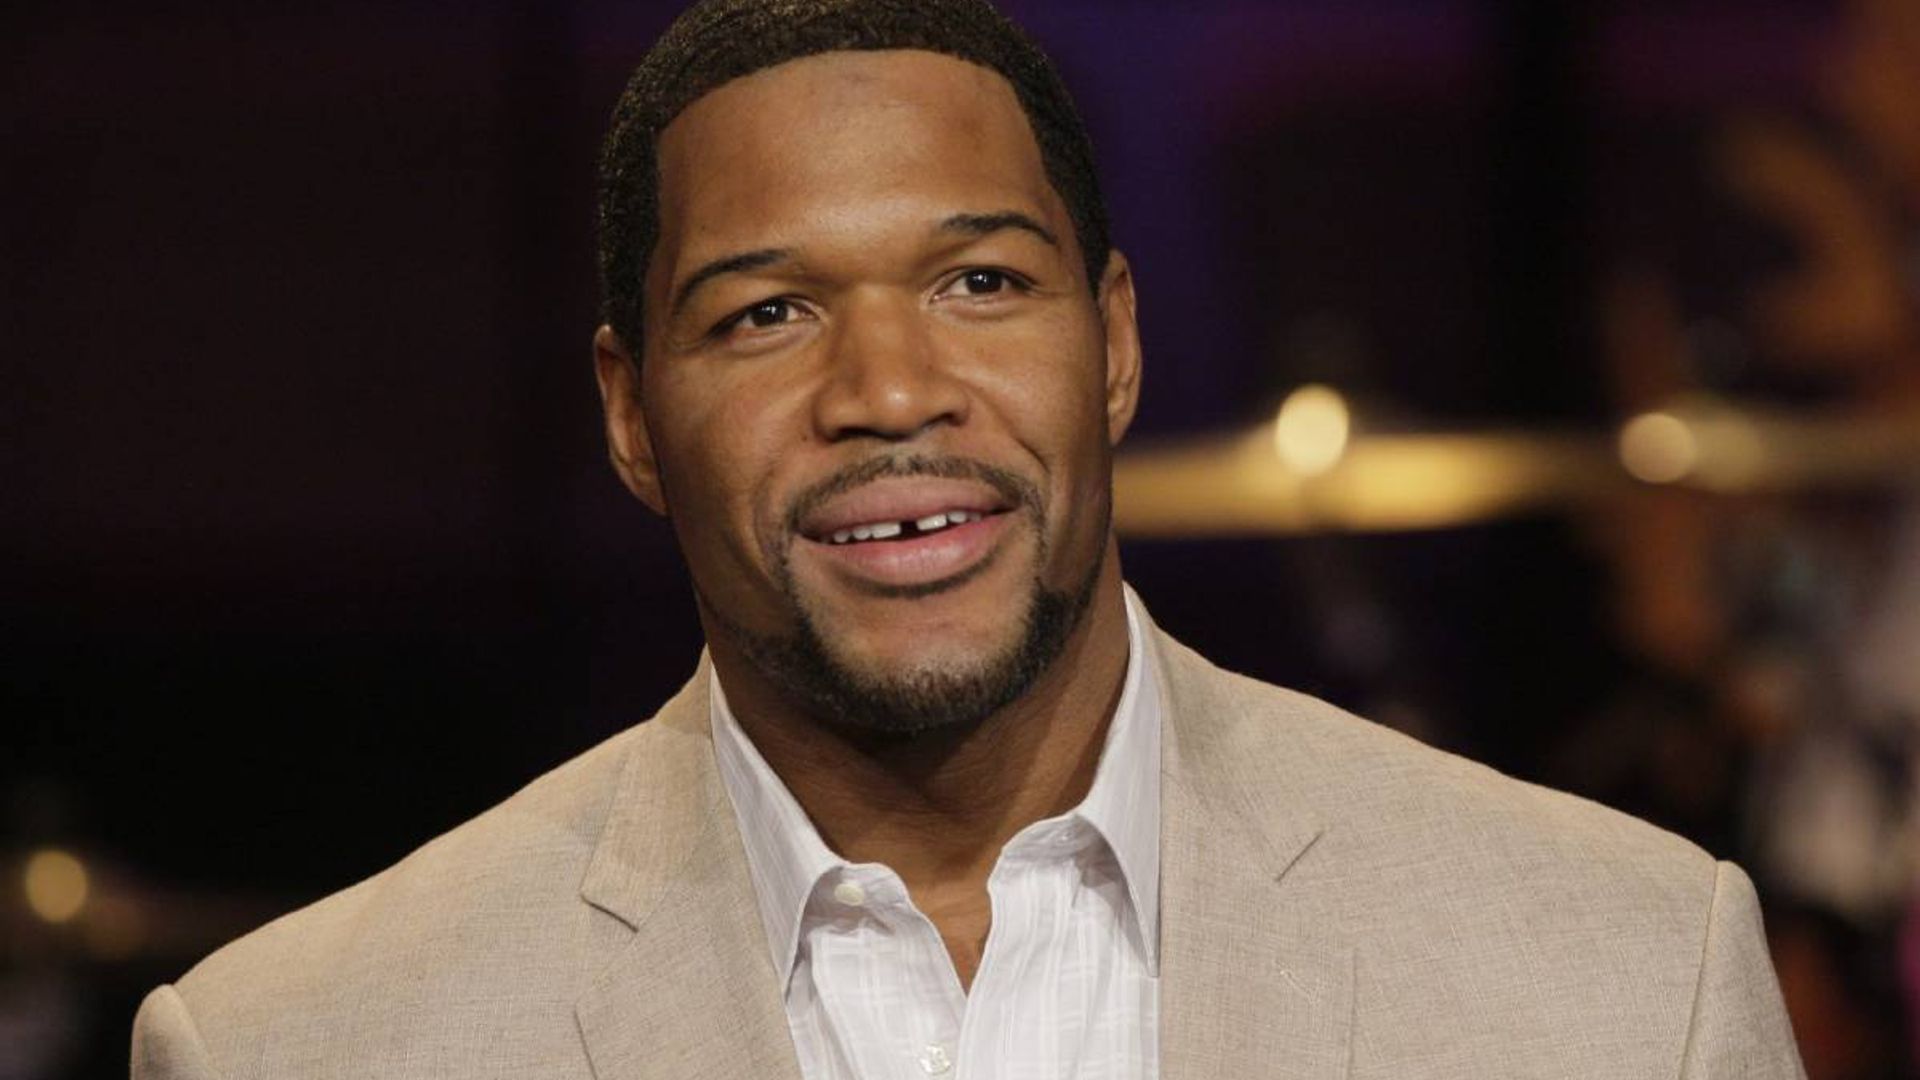 Michael Strahan celebrates love with sweet family photos to mark special day